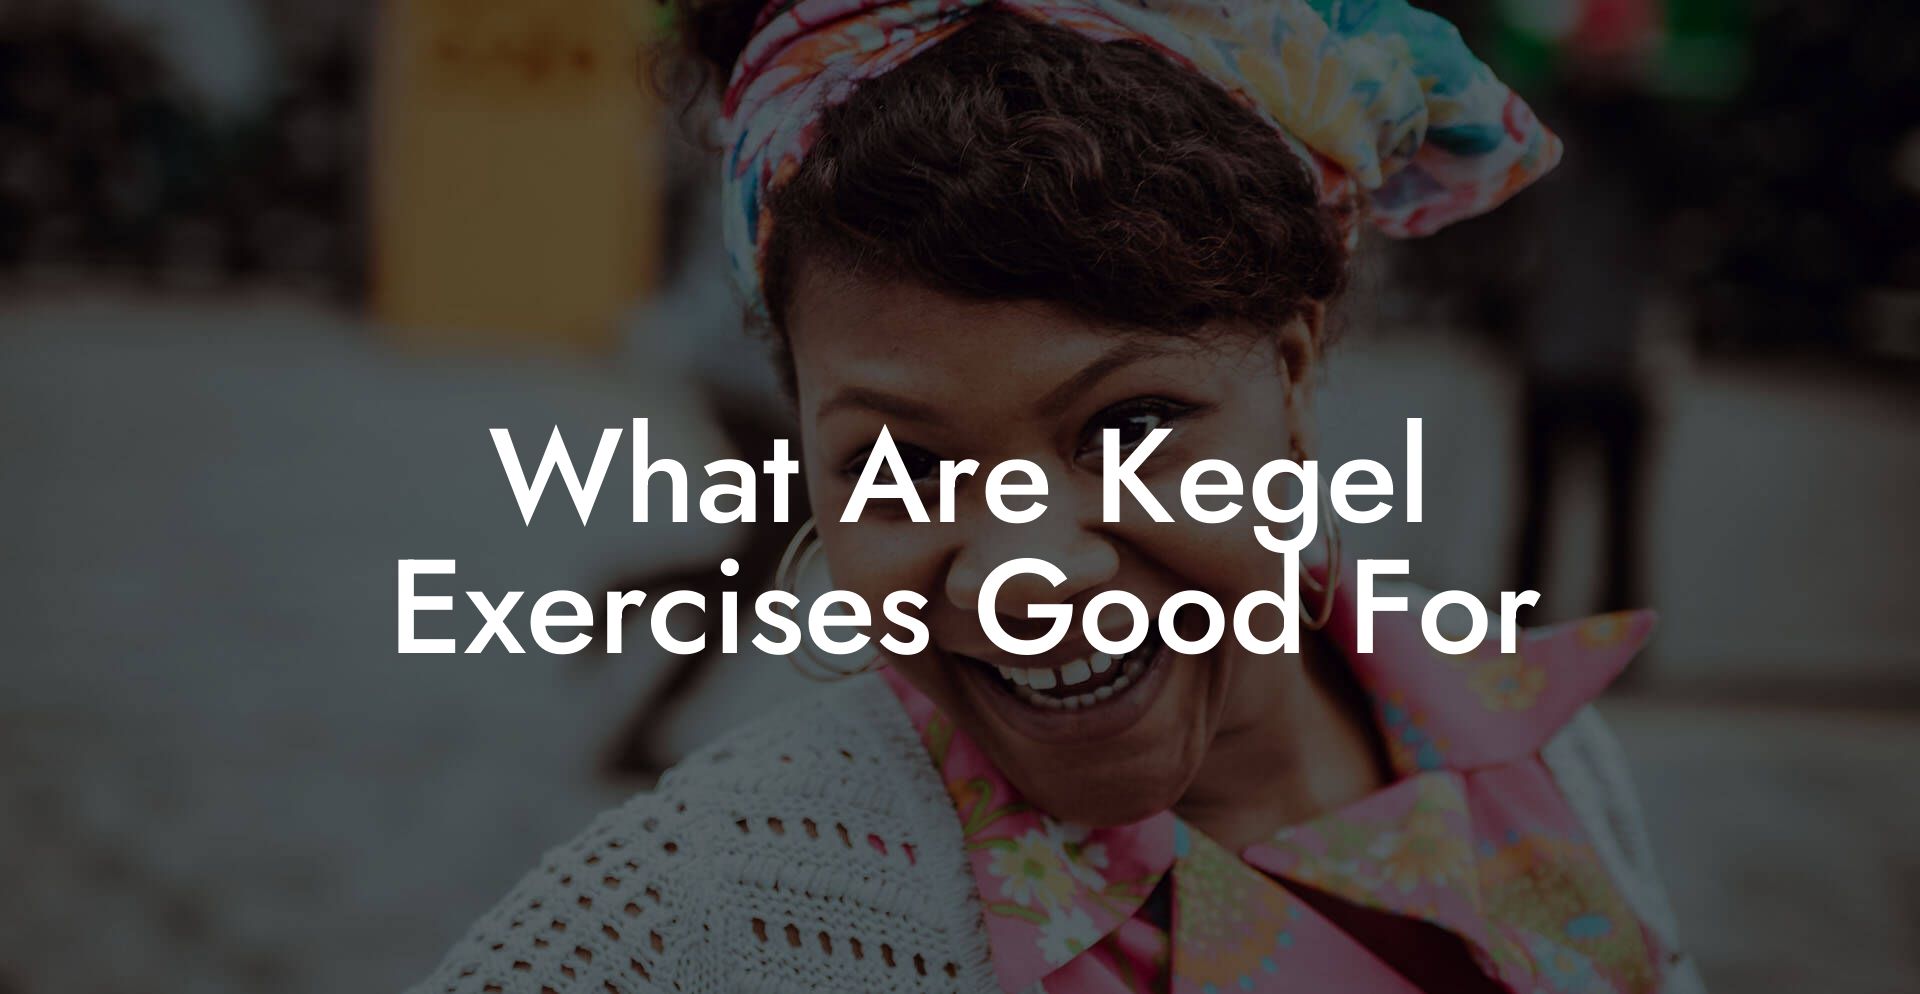 What Are Kegel Exercises Good For